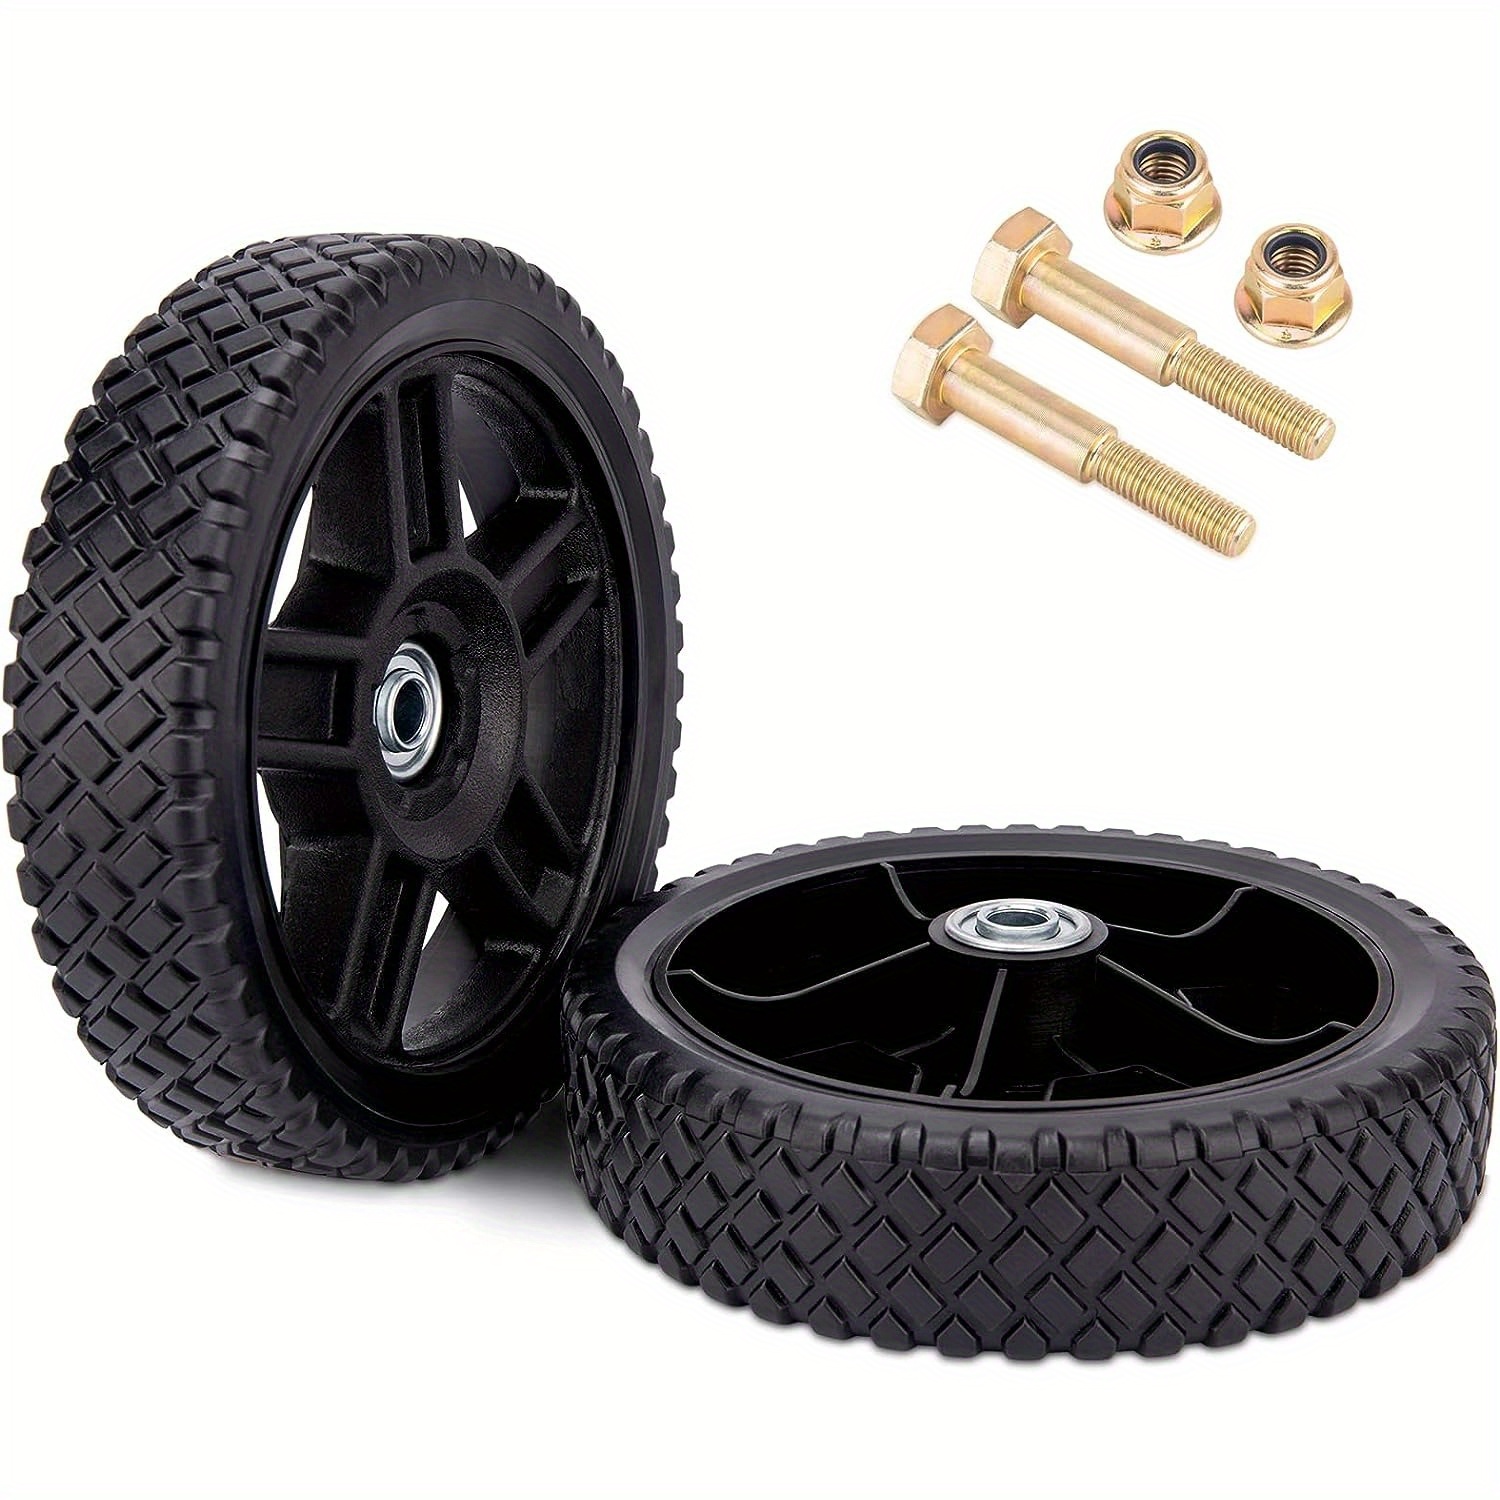 

2pcs/set 8-inch Lawn Mower Wheels Fits Most Standard Push Lawn Mowers With Inner And Outer Bearings - Includes Bolts, Nuts, Mower Accessories